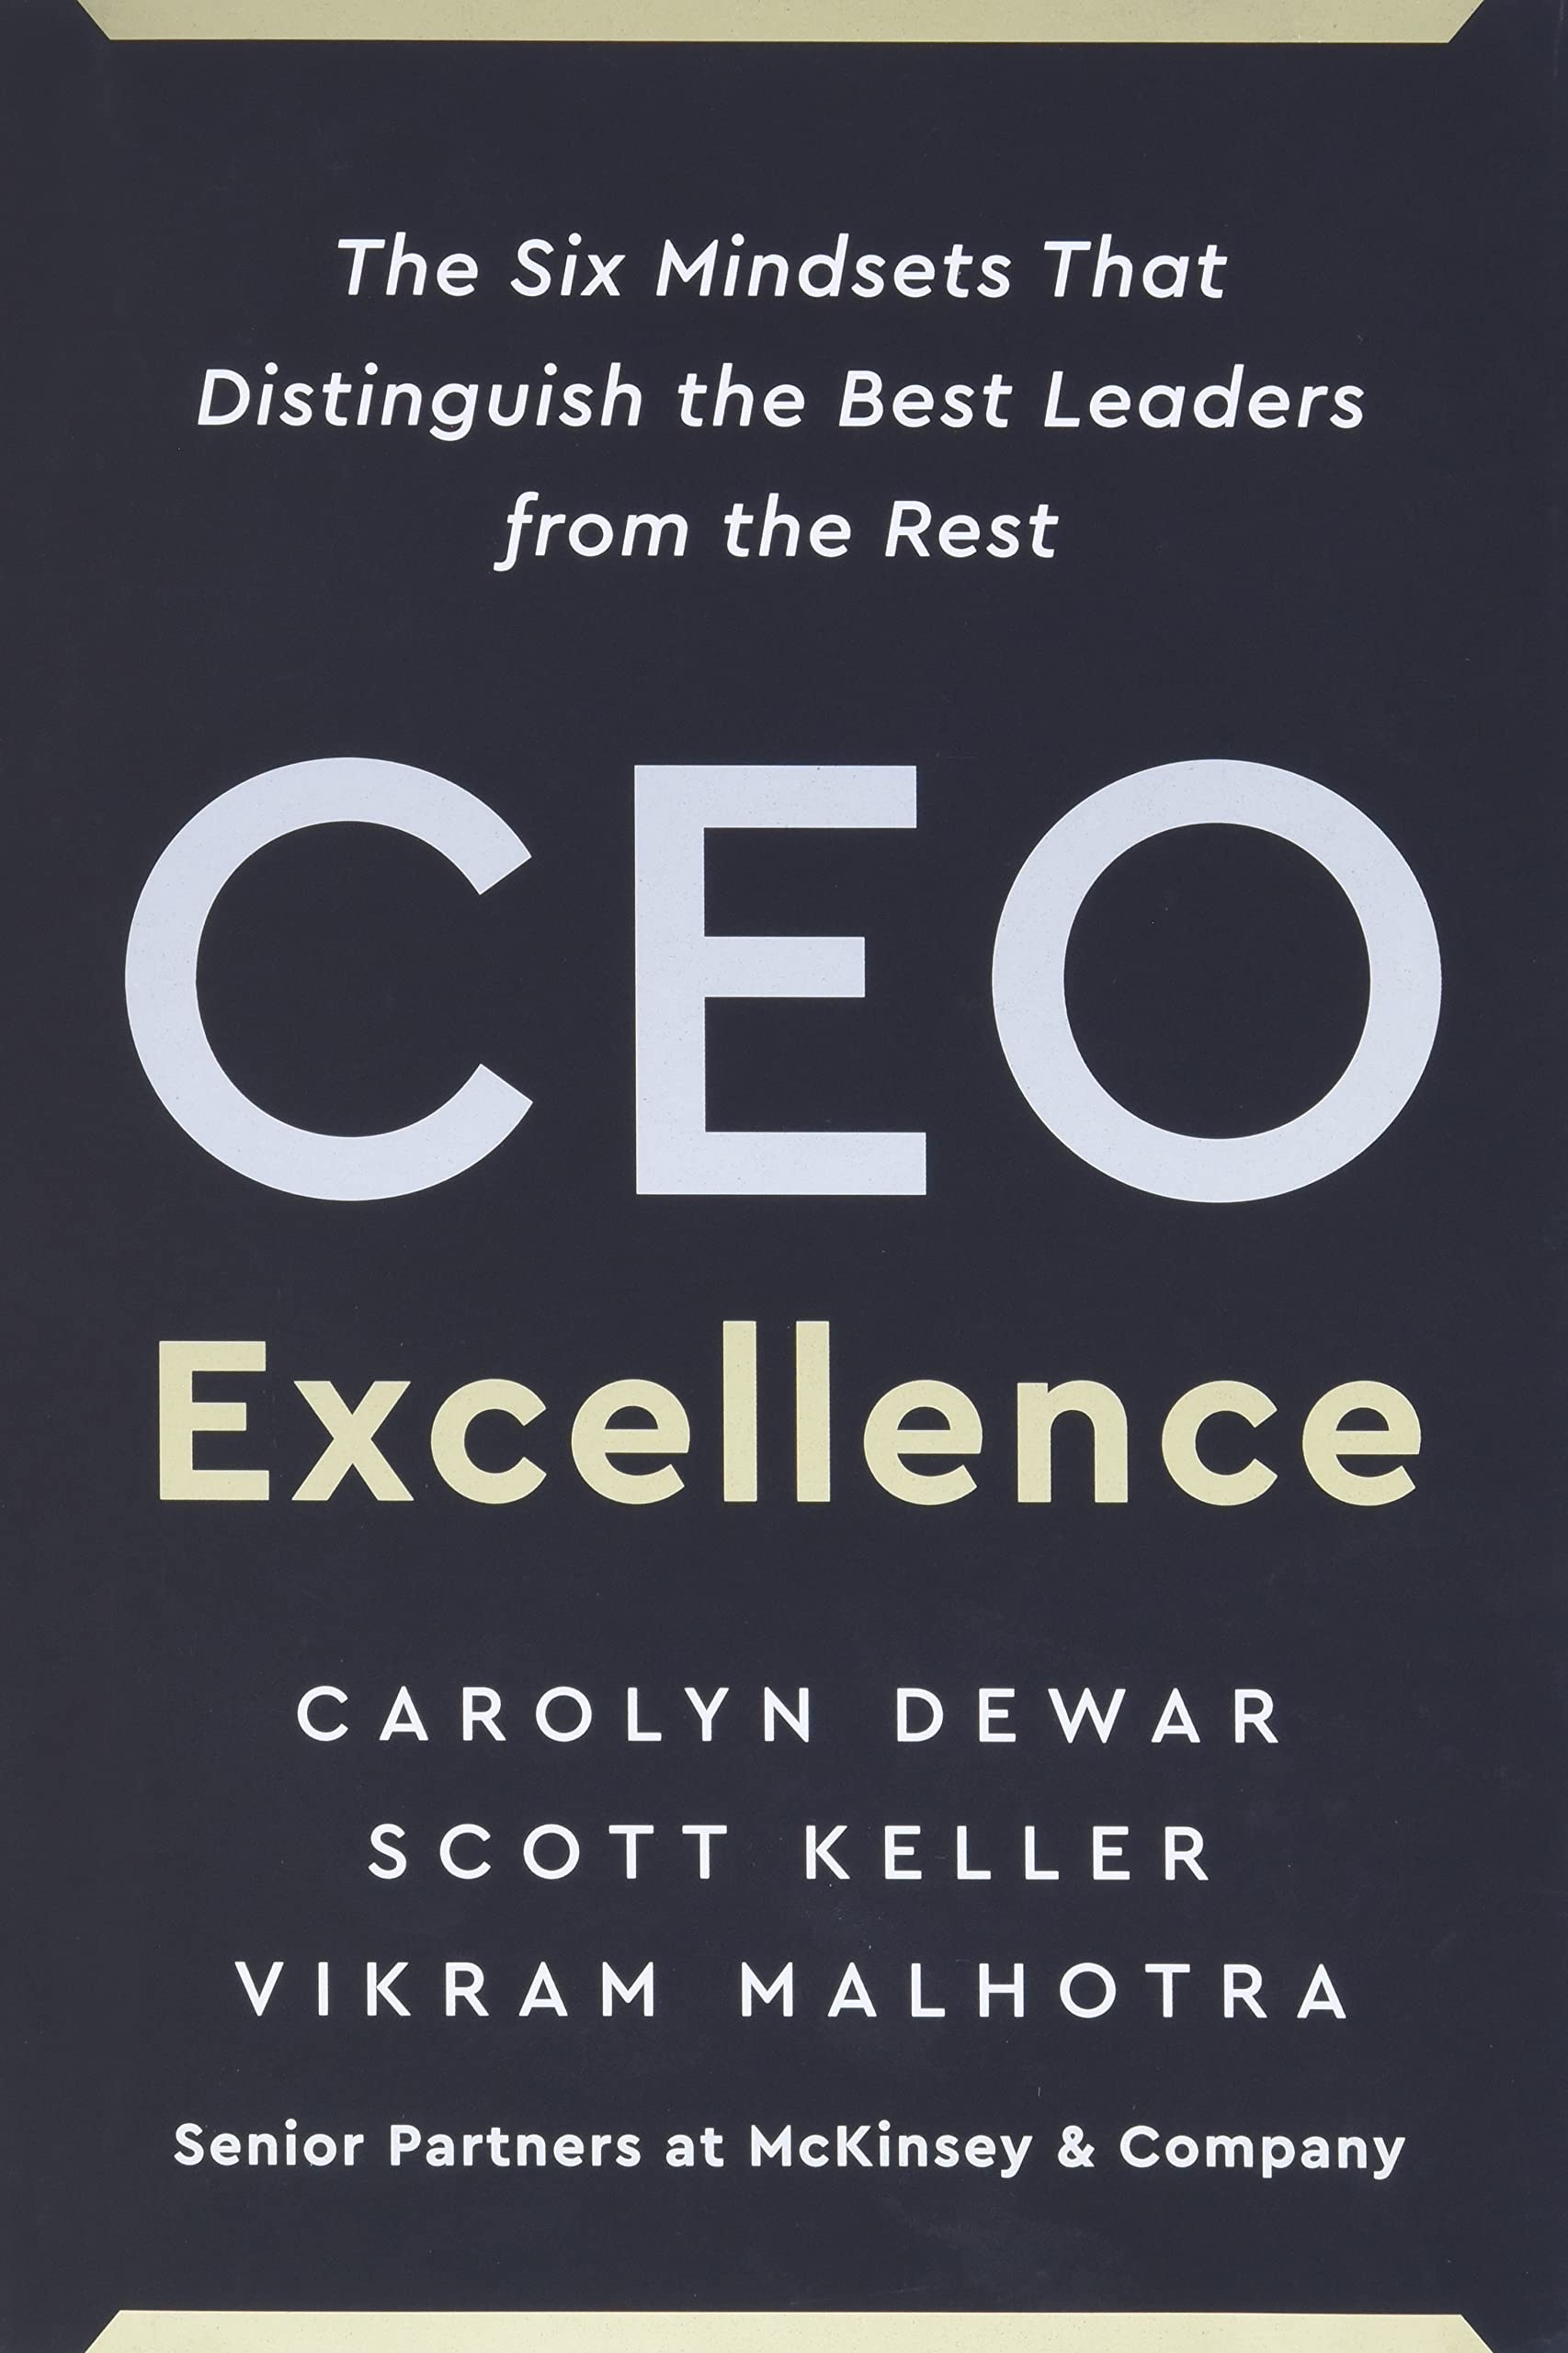 Image for "CEO Excellence"